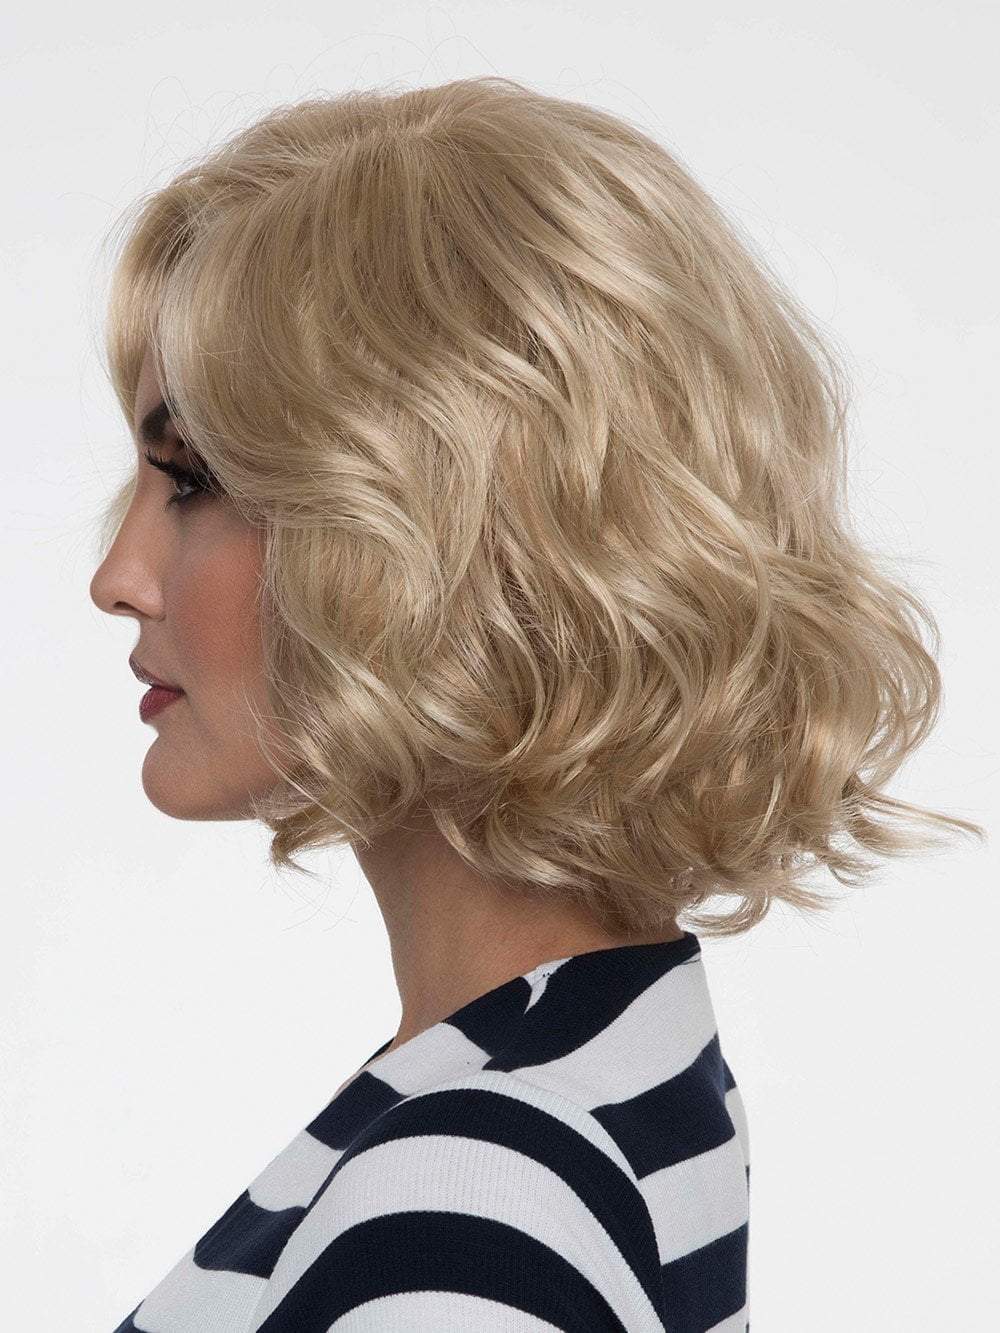 Coco's artfully curled layers add a touch of flirty sophistication